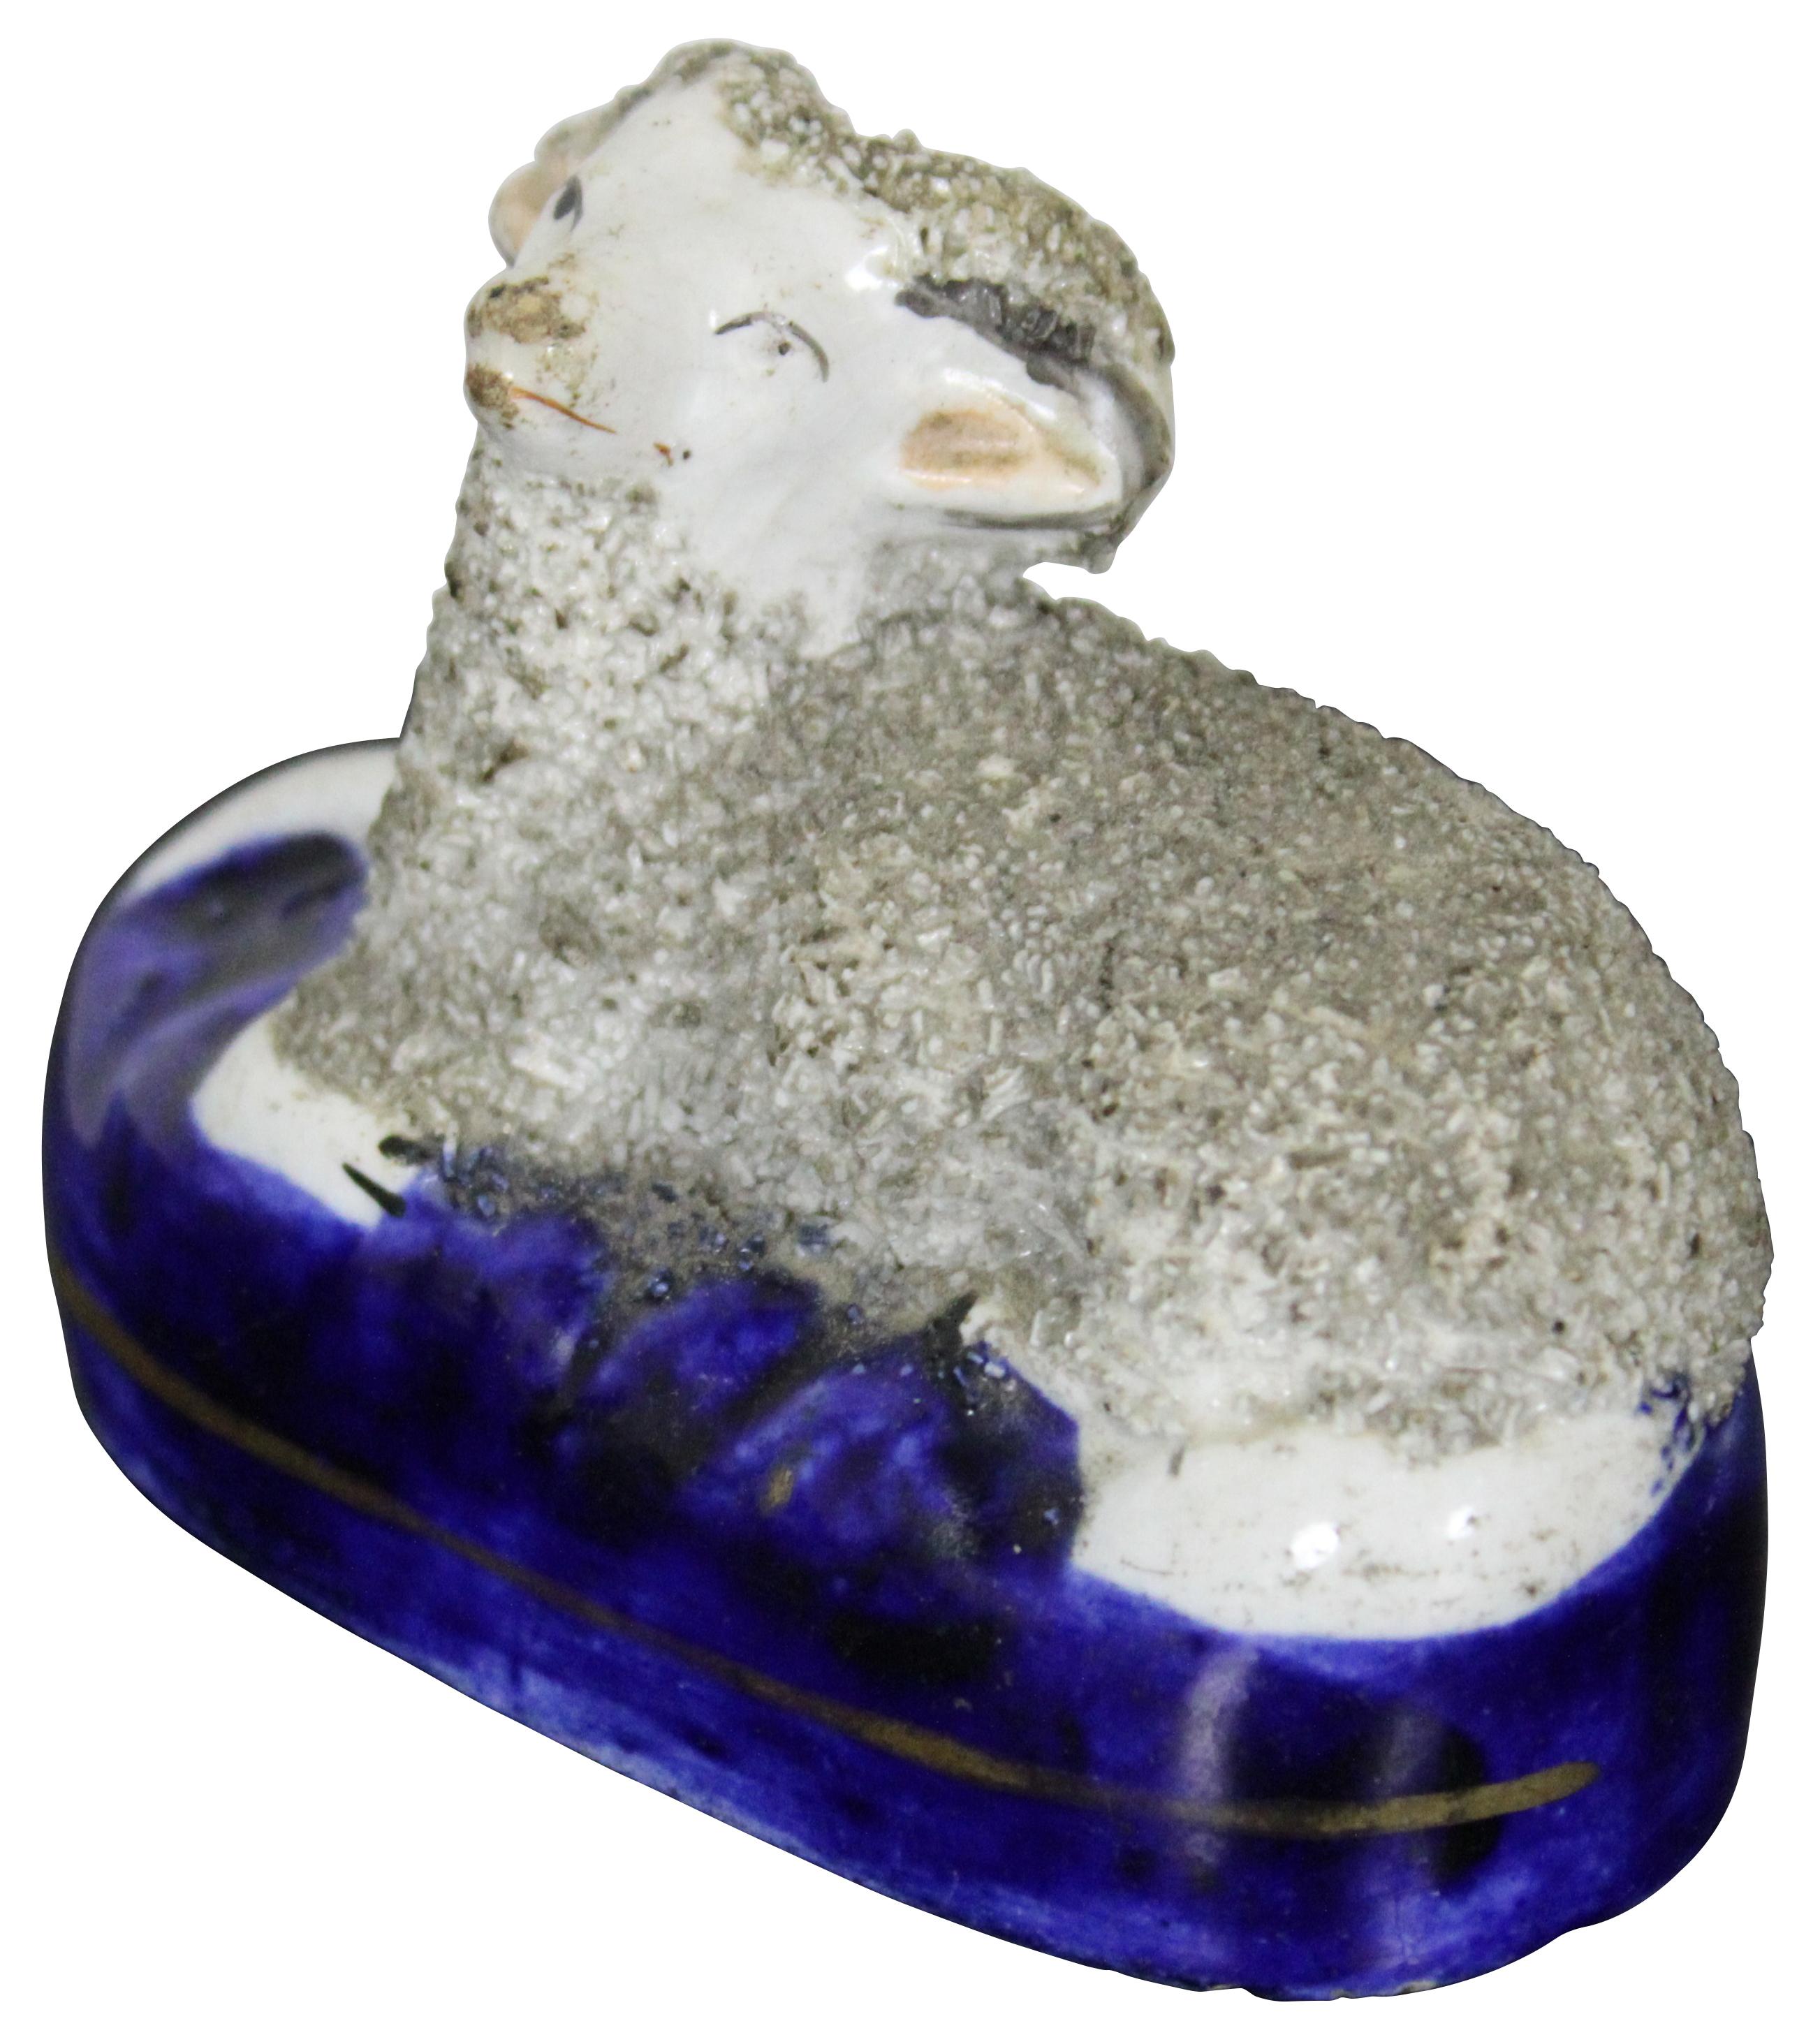 Antique Staffordshire figurine of a confetti porcelain ram laying on a blue base.